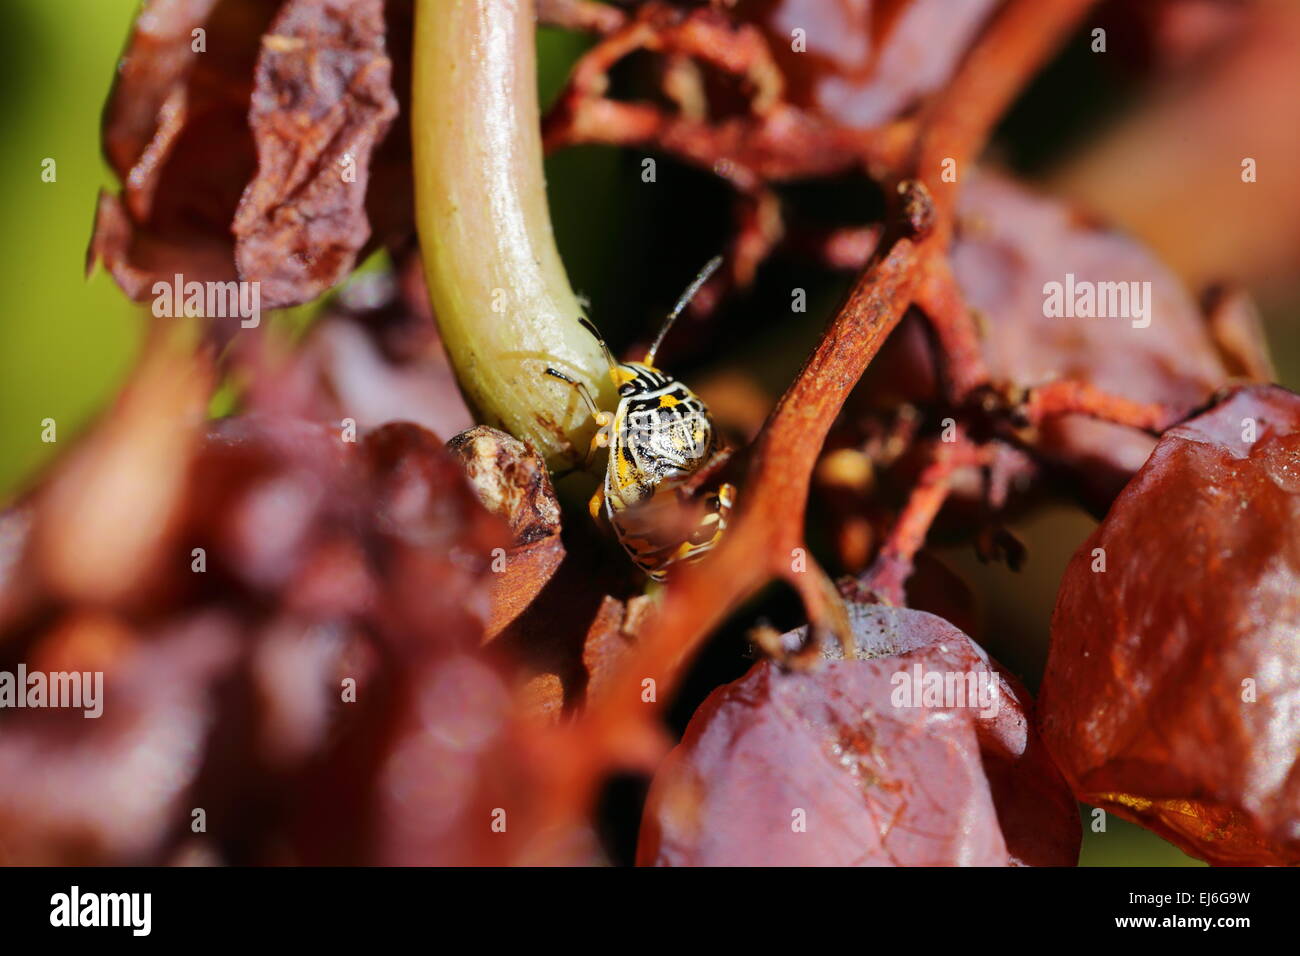 Insect on a bunch of decaying grapes on a grape vine Stock Photo